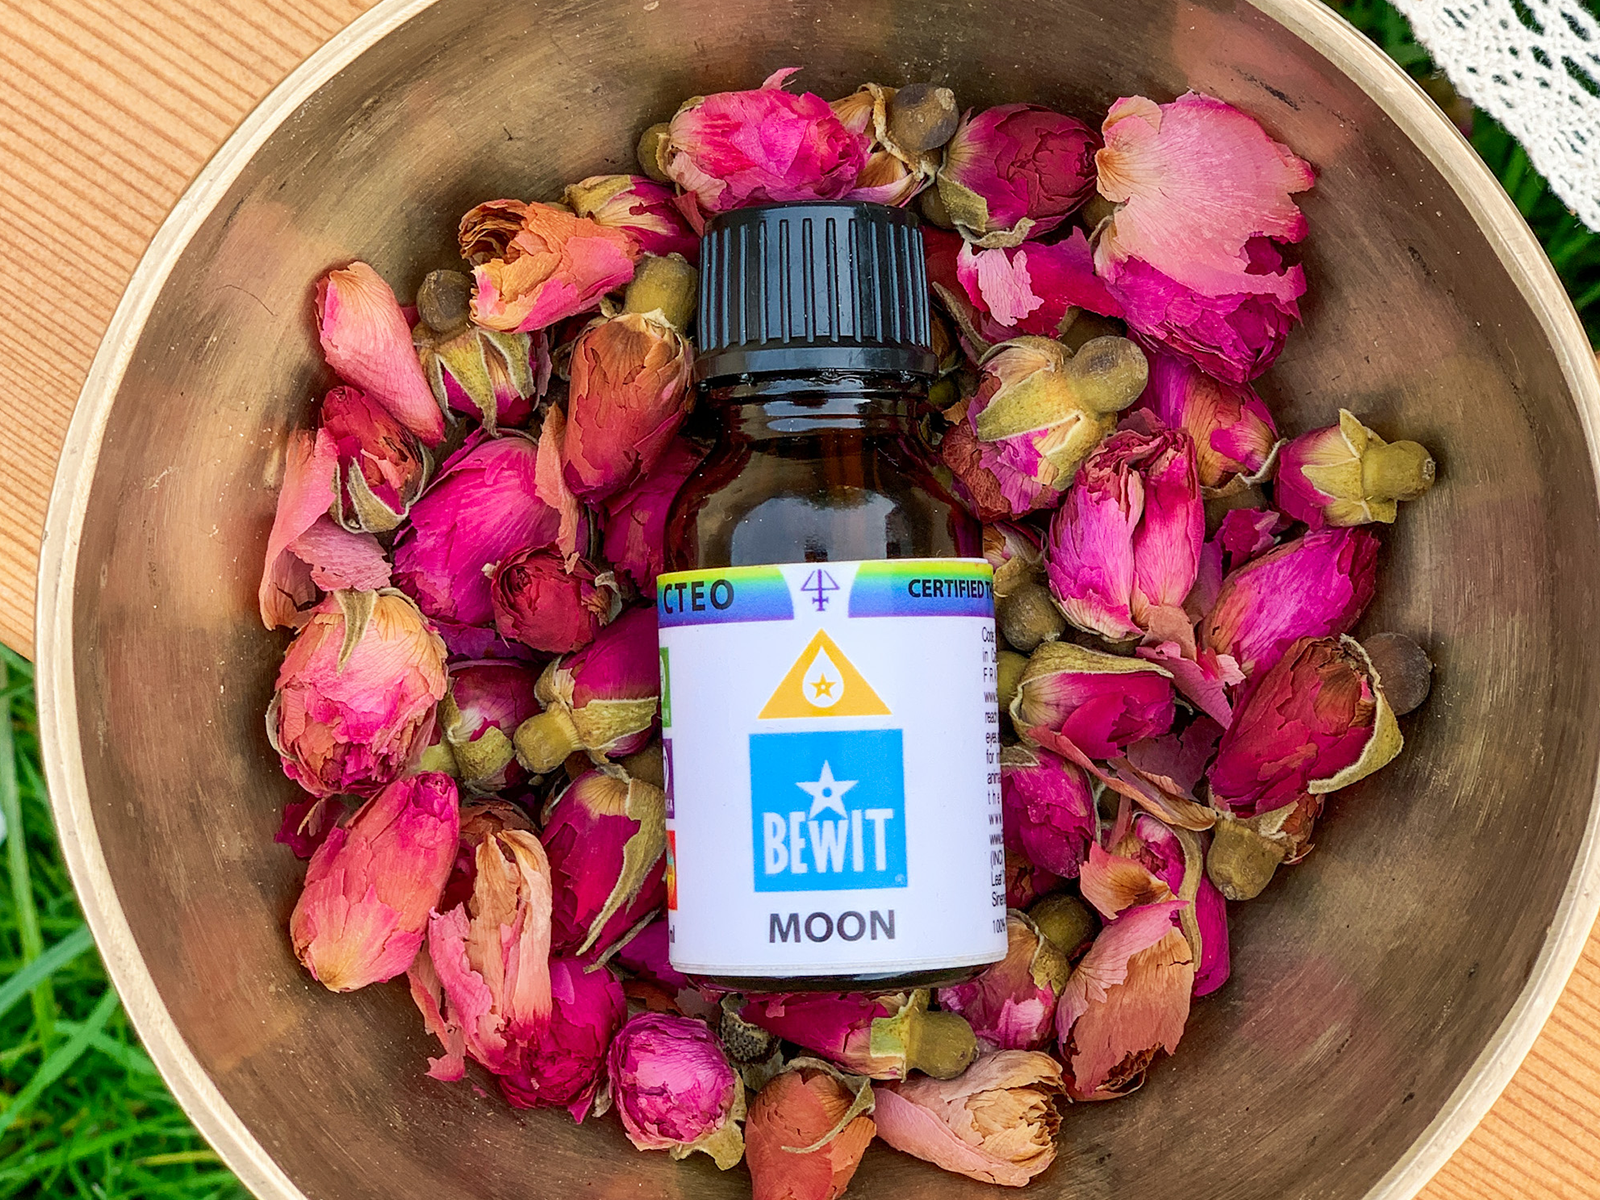 BEWIT MOON - A wonderful blend of the essential oils - 5